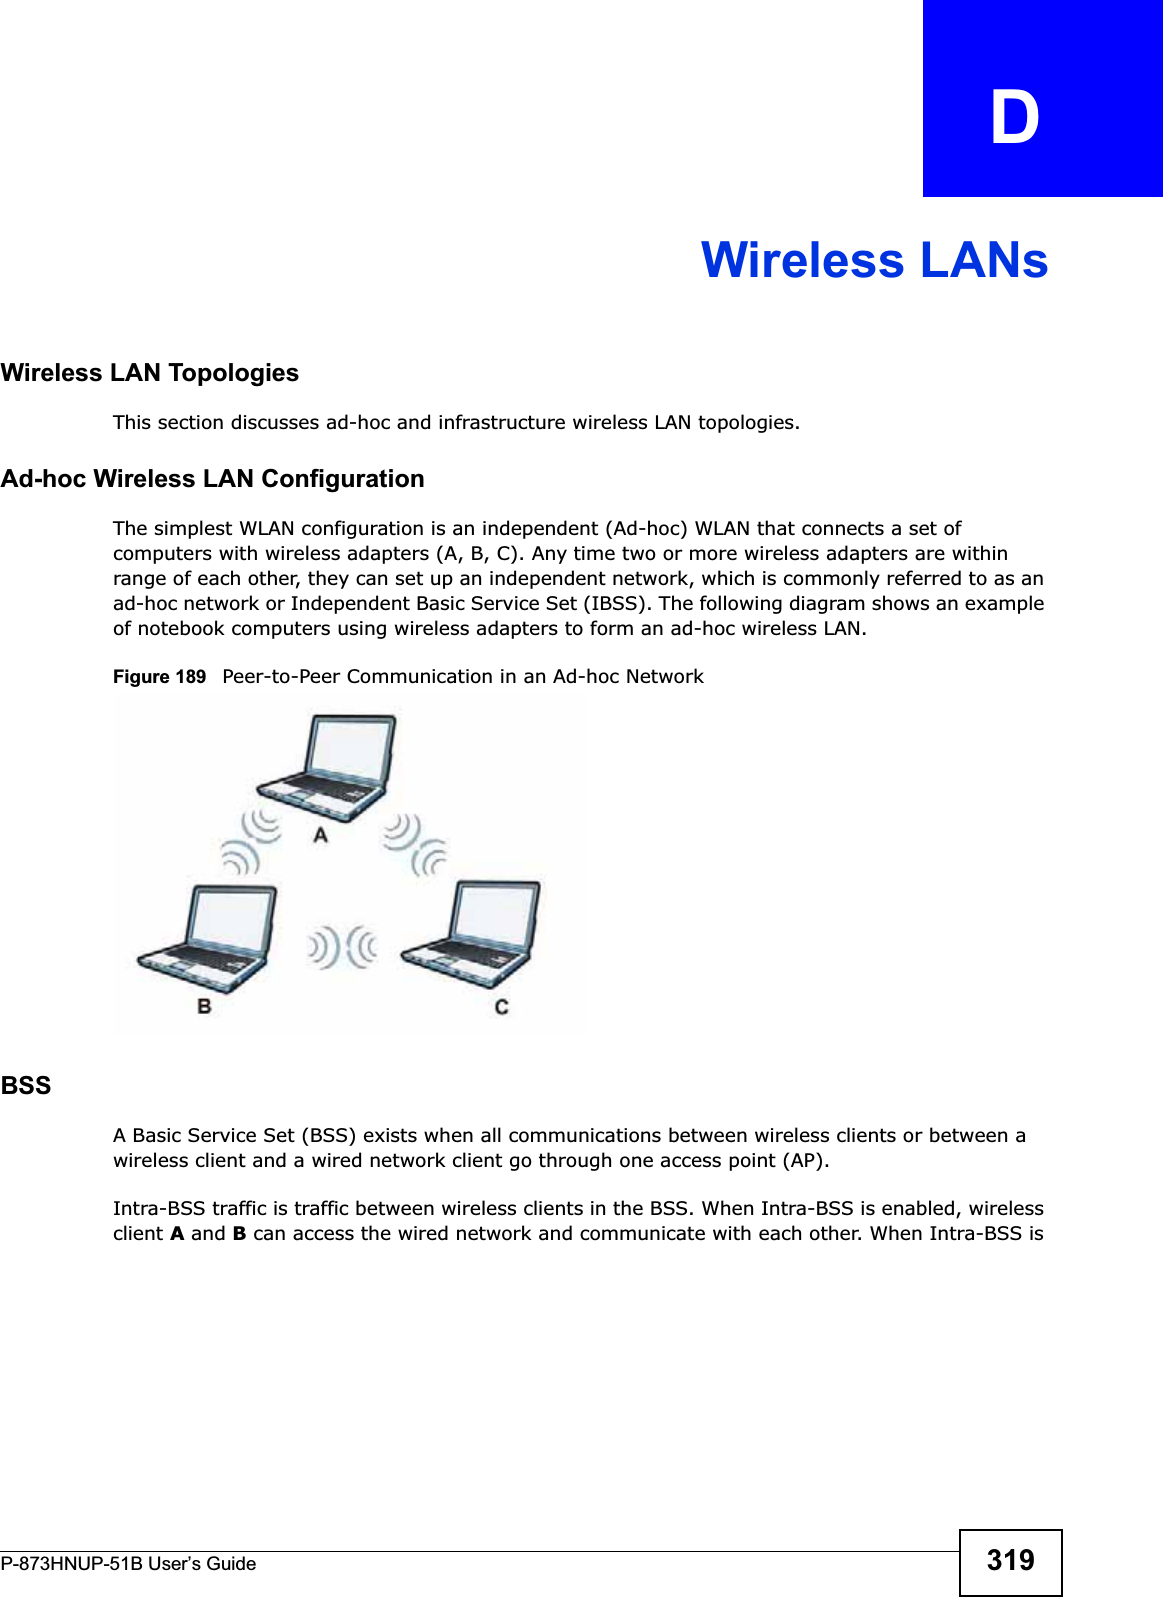 P-873HNUP-51B User’s Guide 319APPENDIX   DWireless LANsWireless LAN TopologiesThis section discusses ad-hoc and infrastructure wireless LAN topologies.Ad-hoc Wireless LAN ConfigurationThe simplest WLAN configuration is an independent (Ad-hoc) WLAN that connects a set of computers with wireless adapters (A, B, C). Any time two or more wireless adapters are within range of each other, they can set up an independent network, which is commonly referred to as an ad-hoc network or Independent Basic Service Set (IBSS). The following diagram shows an example of notebook computers using wireless adapters to form an ad-hoc wireless LAN. Figure 189   Peer-to-Peer Communication in an Ad-hoc NetworkBSSA Basic Service Set (BSS) exists when all communications between wireless clients or between a wireless client and a wired network client go through one access point (AP). Intra-BSS traffic is traffic between wireless clients in the BSS. When Intra-BSS is enabled, wireless client A and B can access the wired network and communicate with each other. When Intra-BSS is 